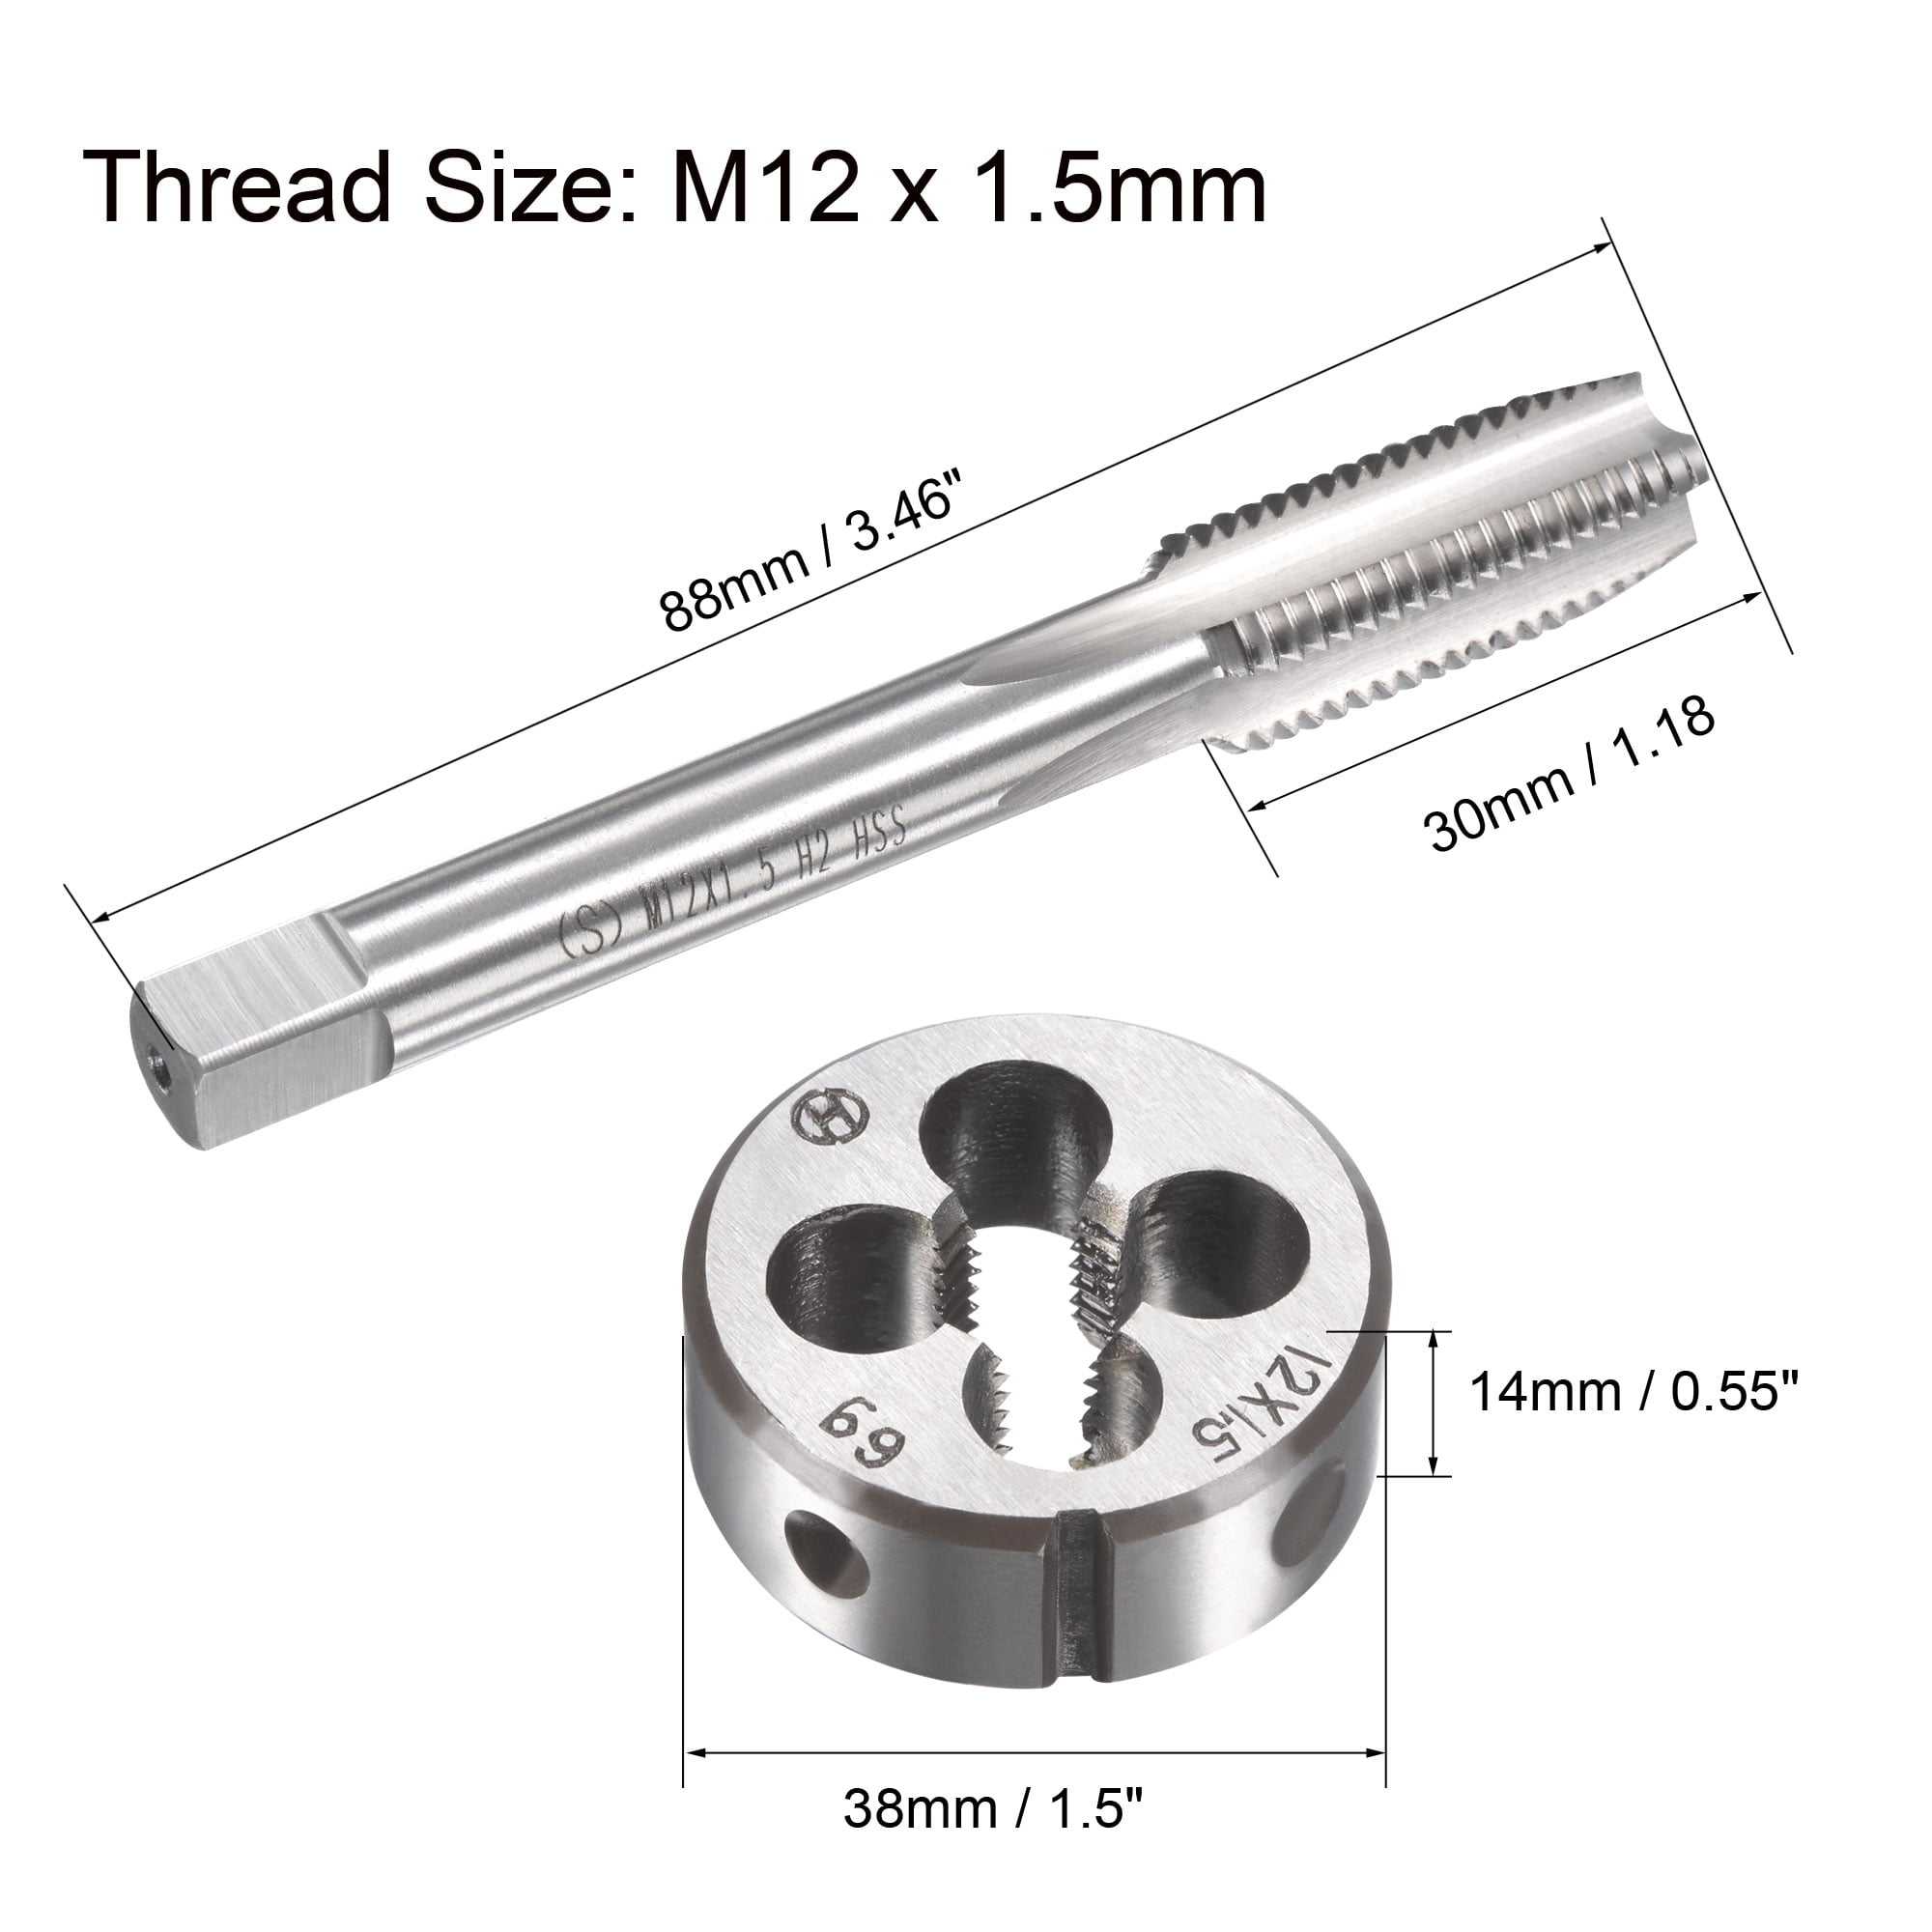 New 1pc Metric Right Hand Die M12x0.5mm Dies Threading Tools M12mm x 0.5mm pitch 